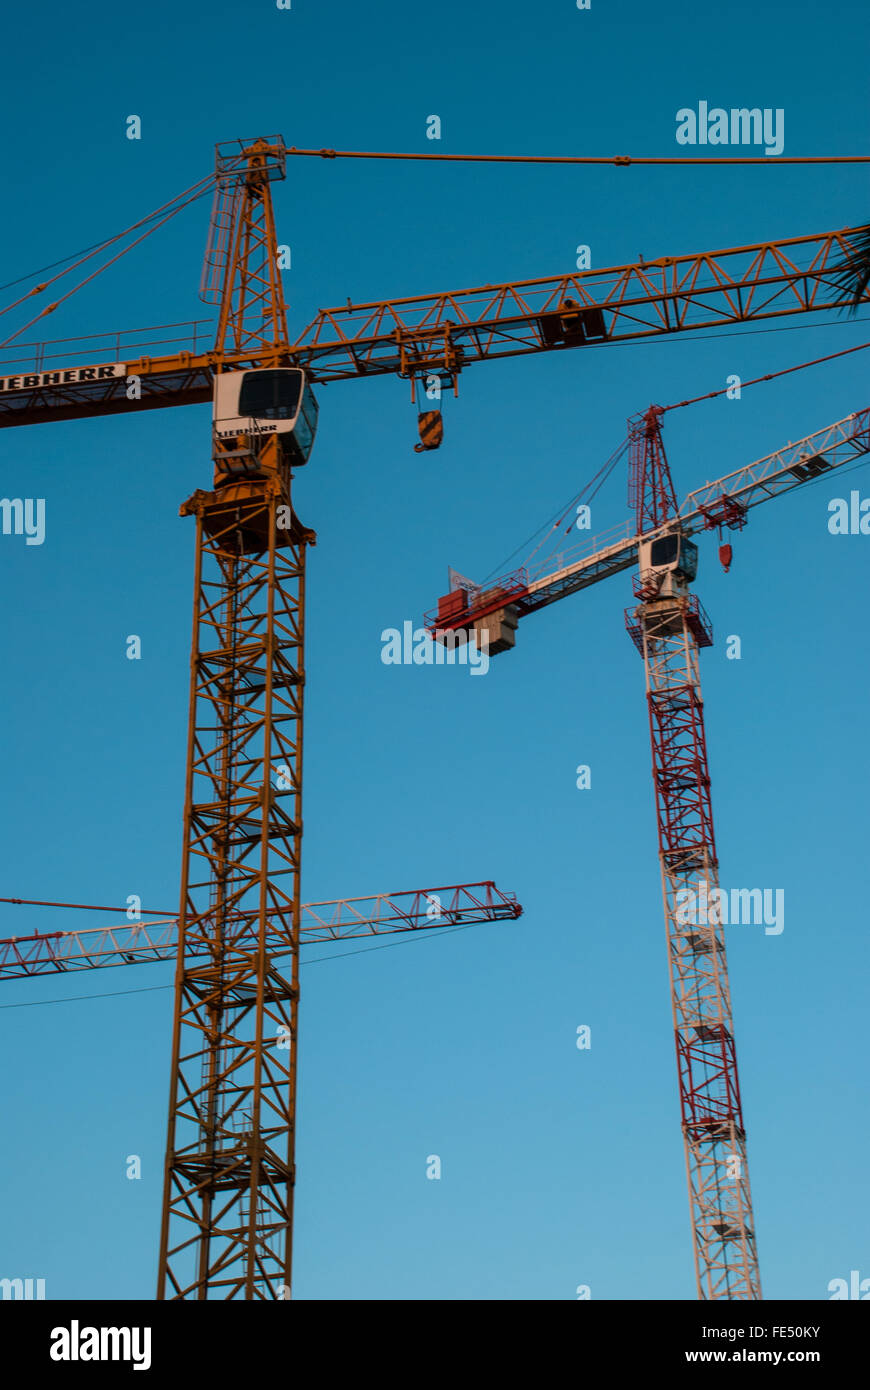 Low Angle View Of Cranes At Construction Site Against Cloudy Sky Banque D'Images